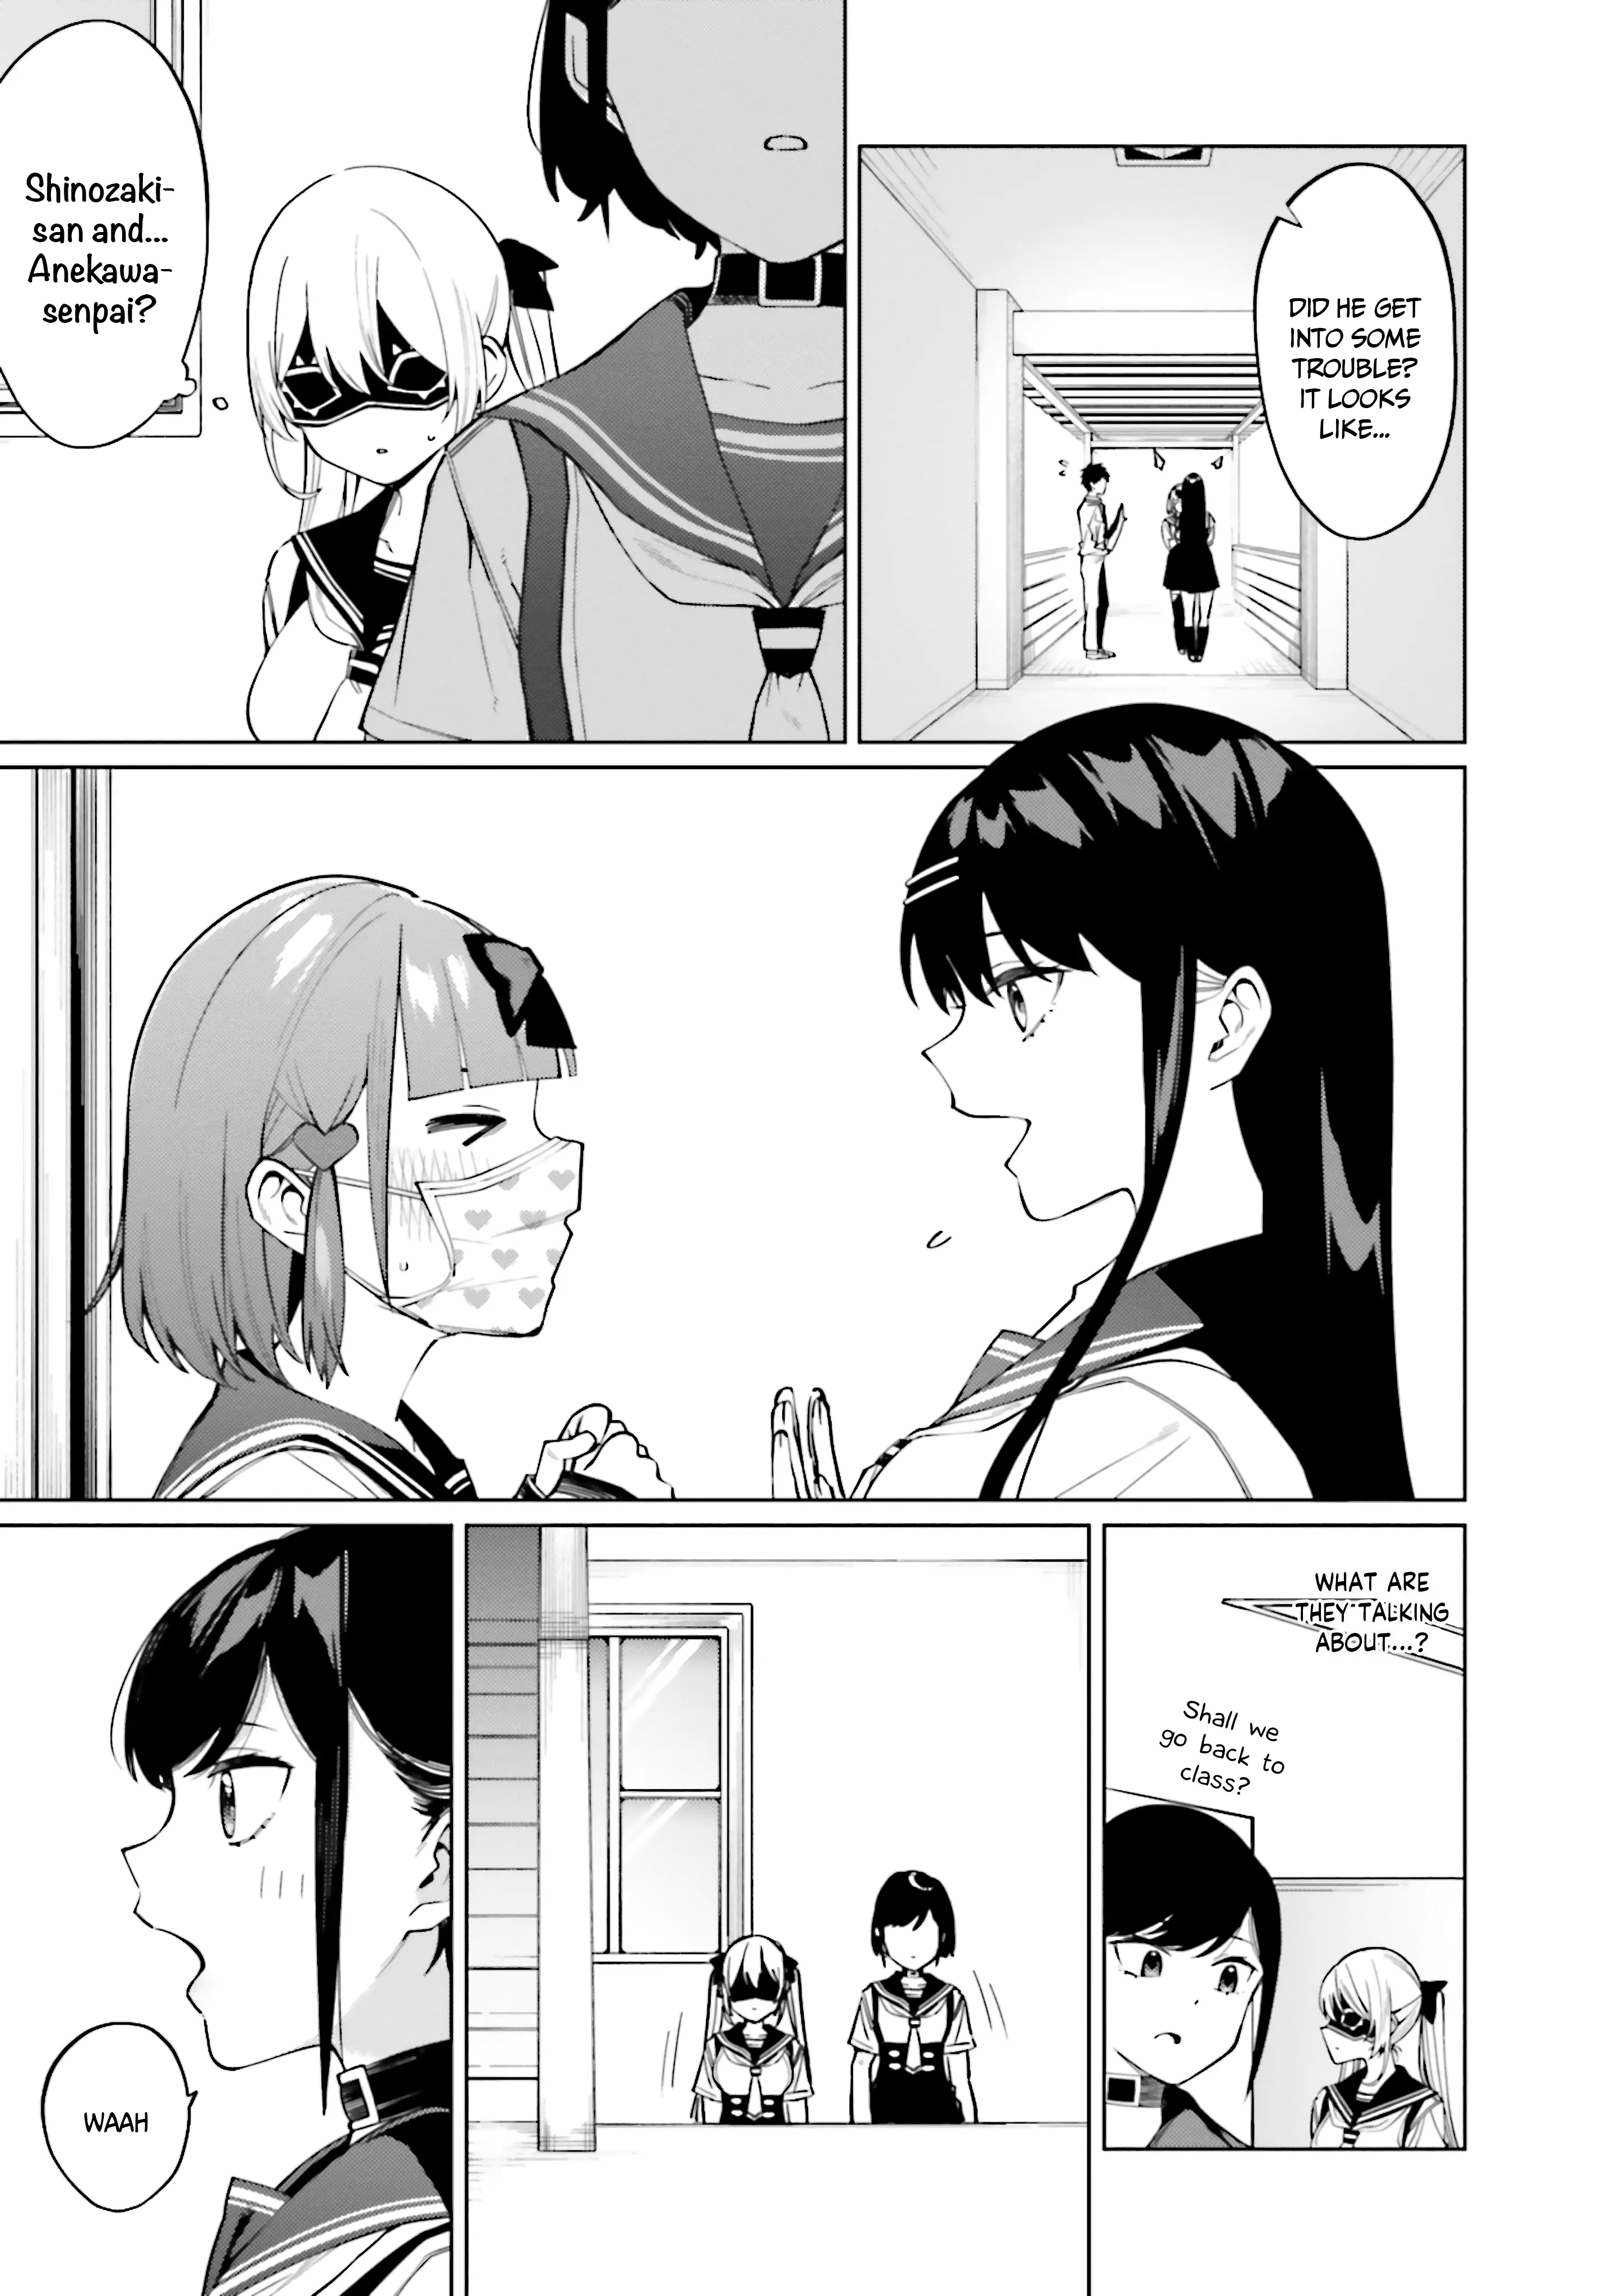 I Don't Understand Shirogane-San's Facial Expression At All - 14 page 16-74221c9c